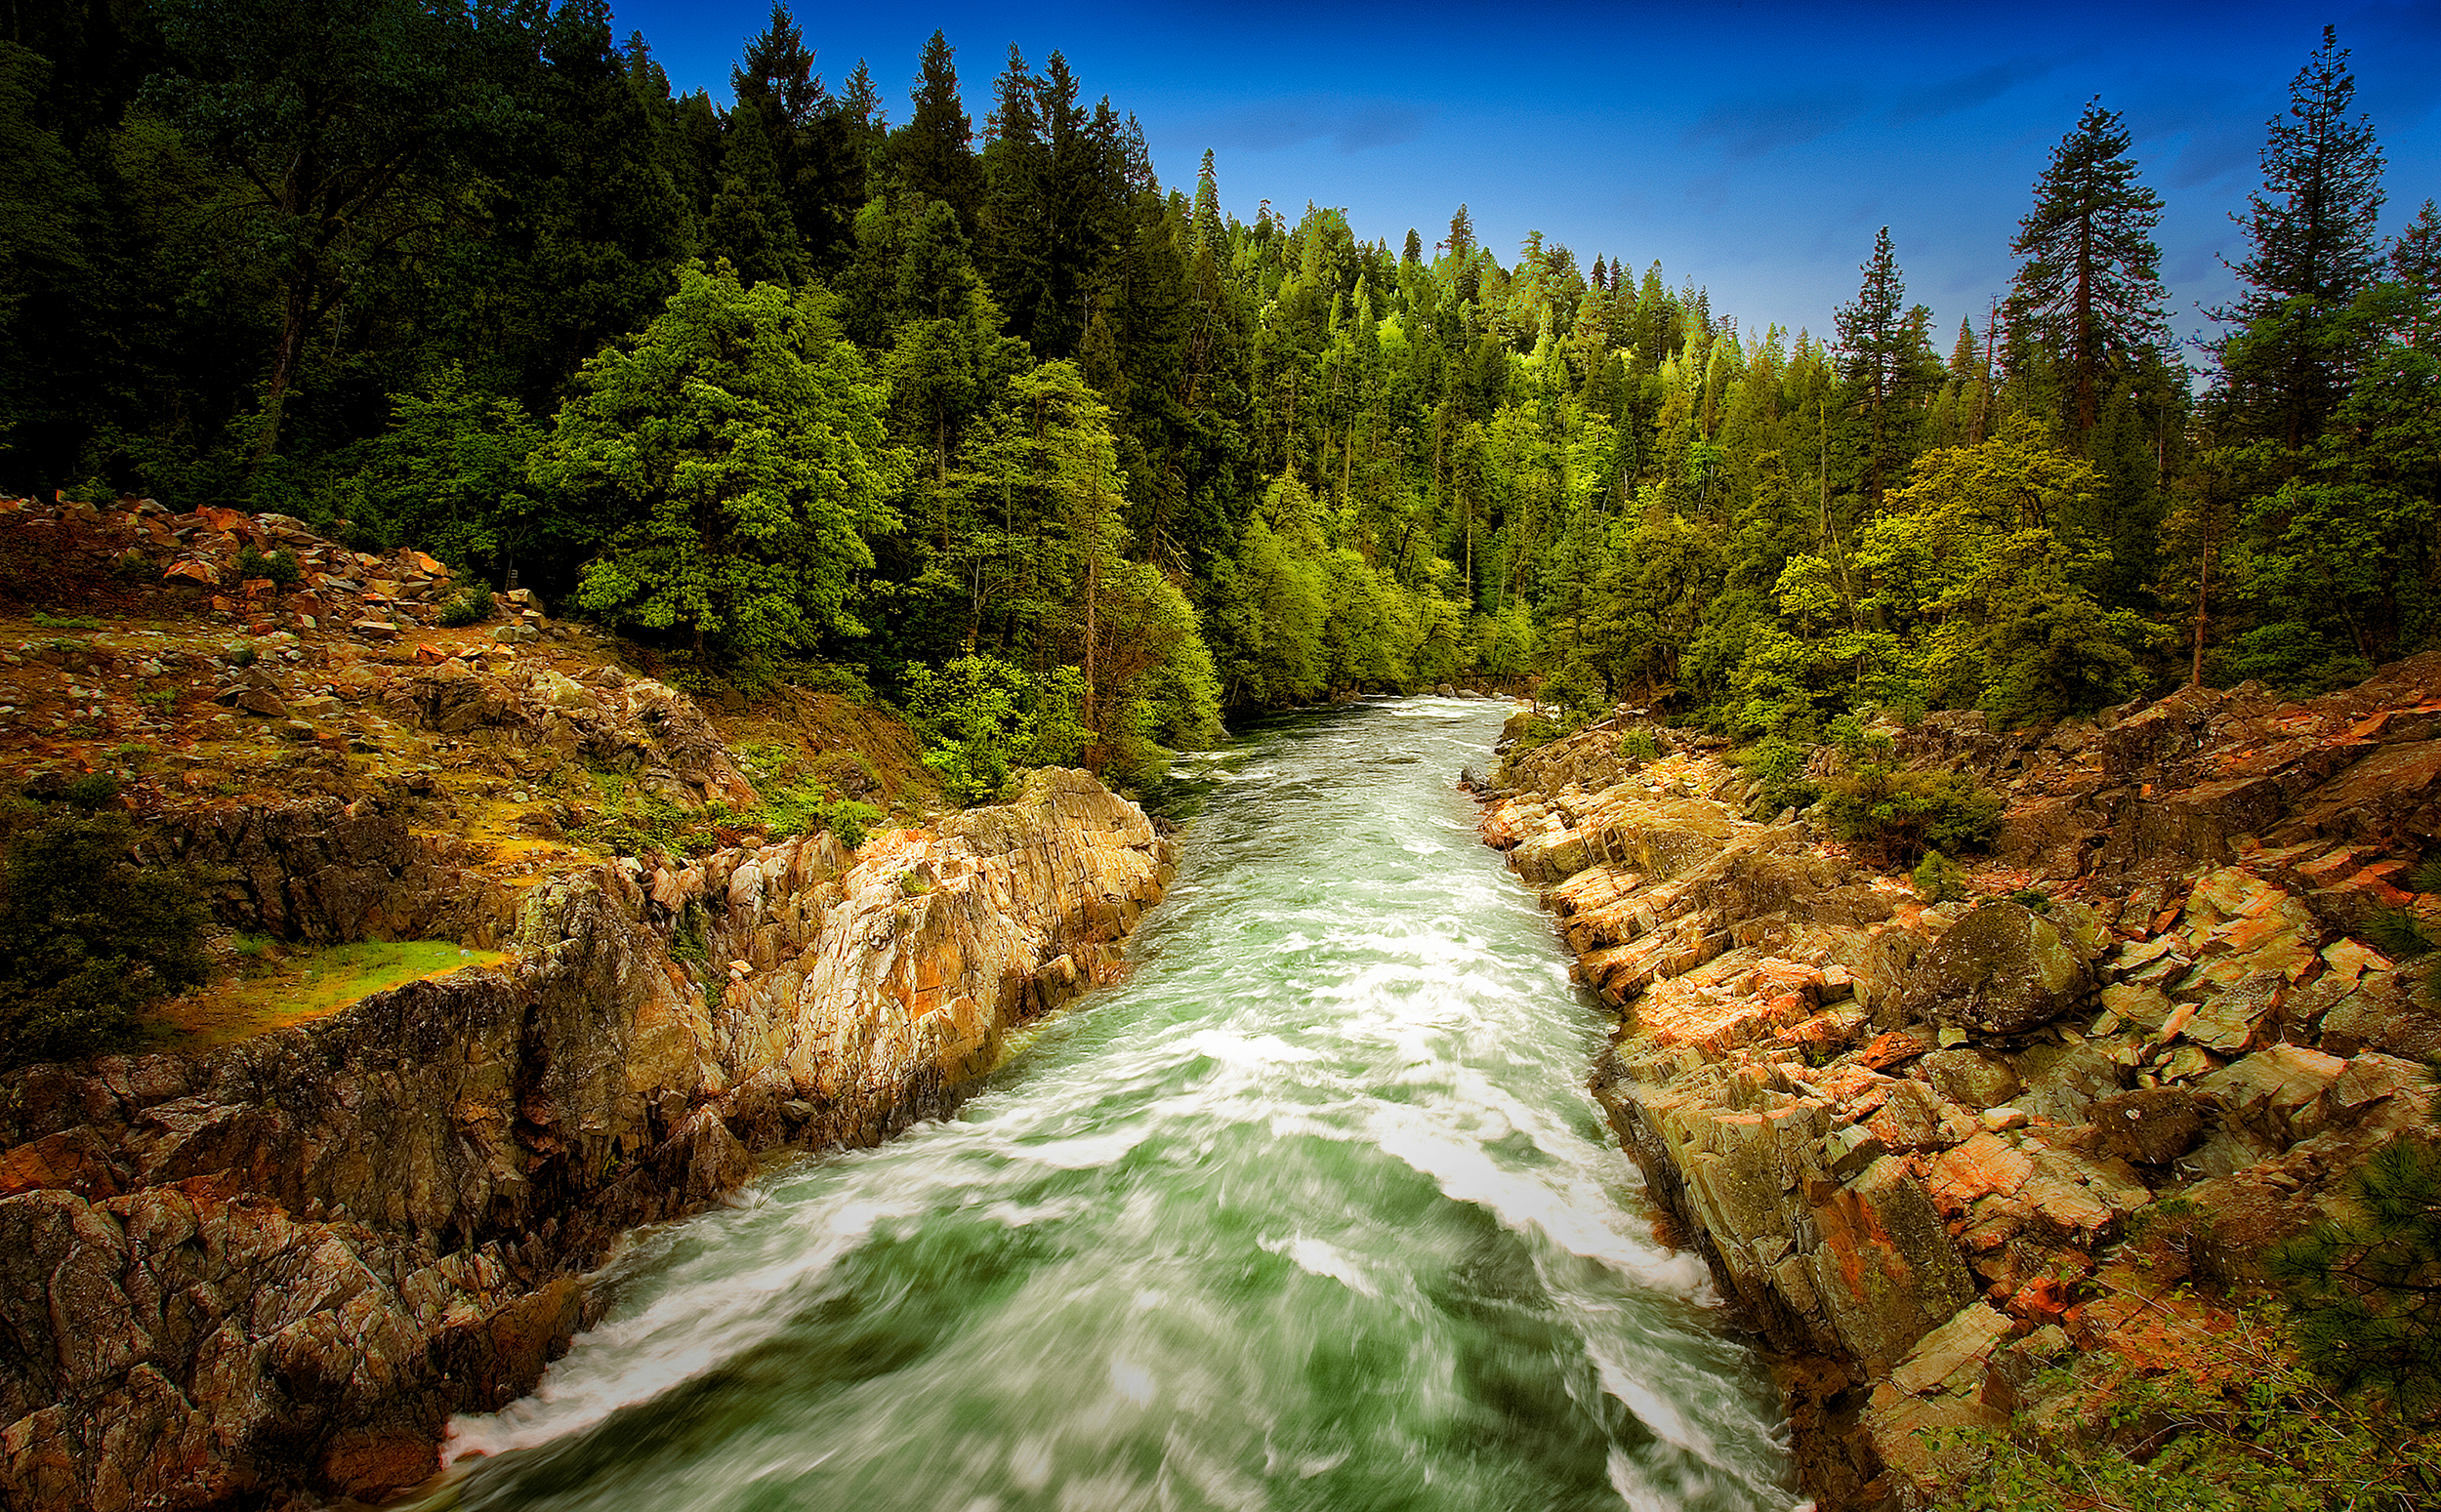 Yuba River | Photo courtesy of Getty Images